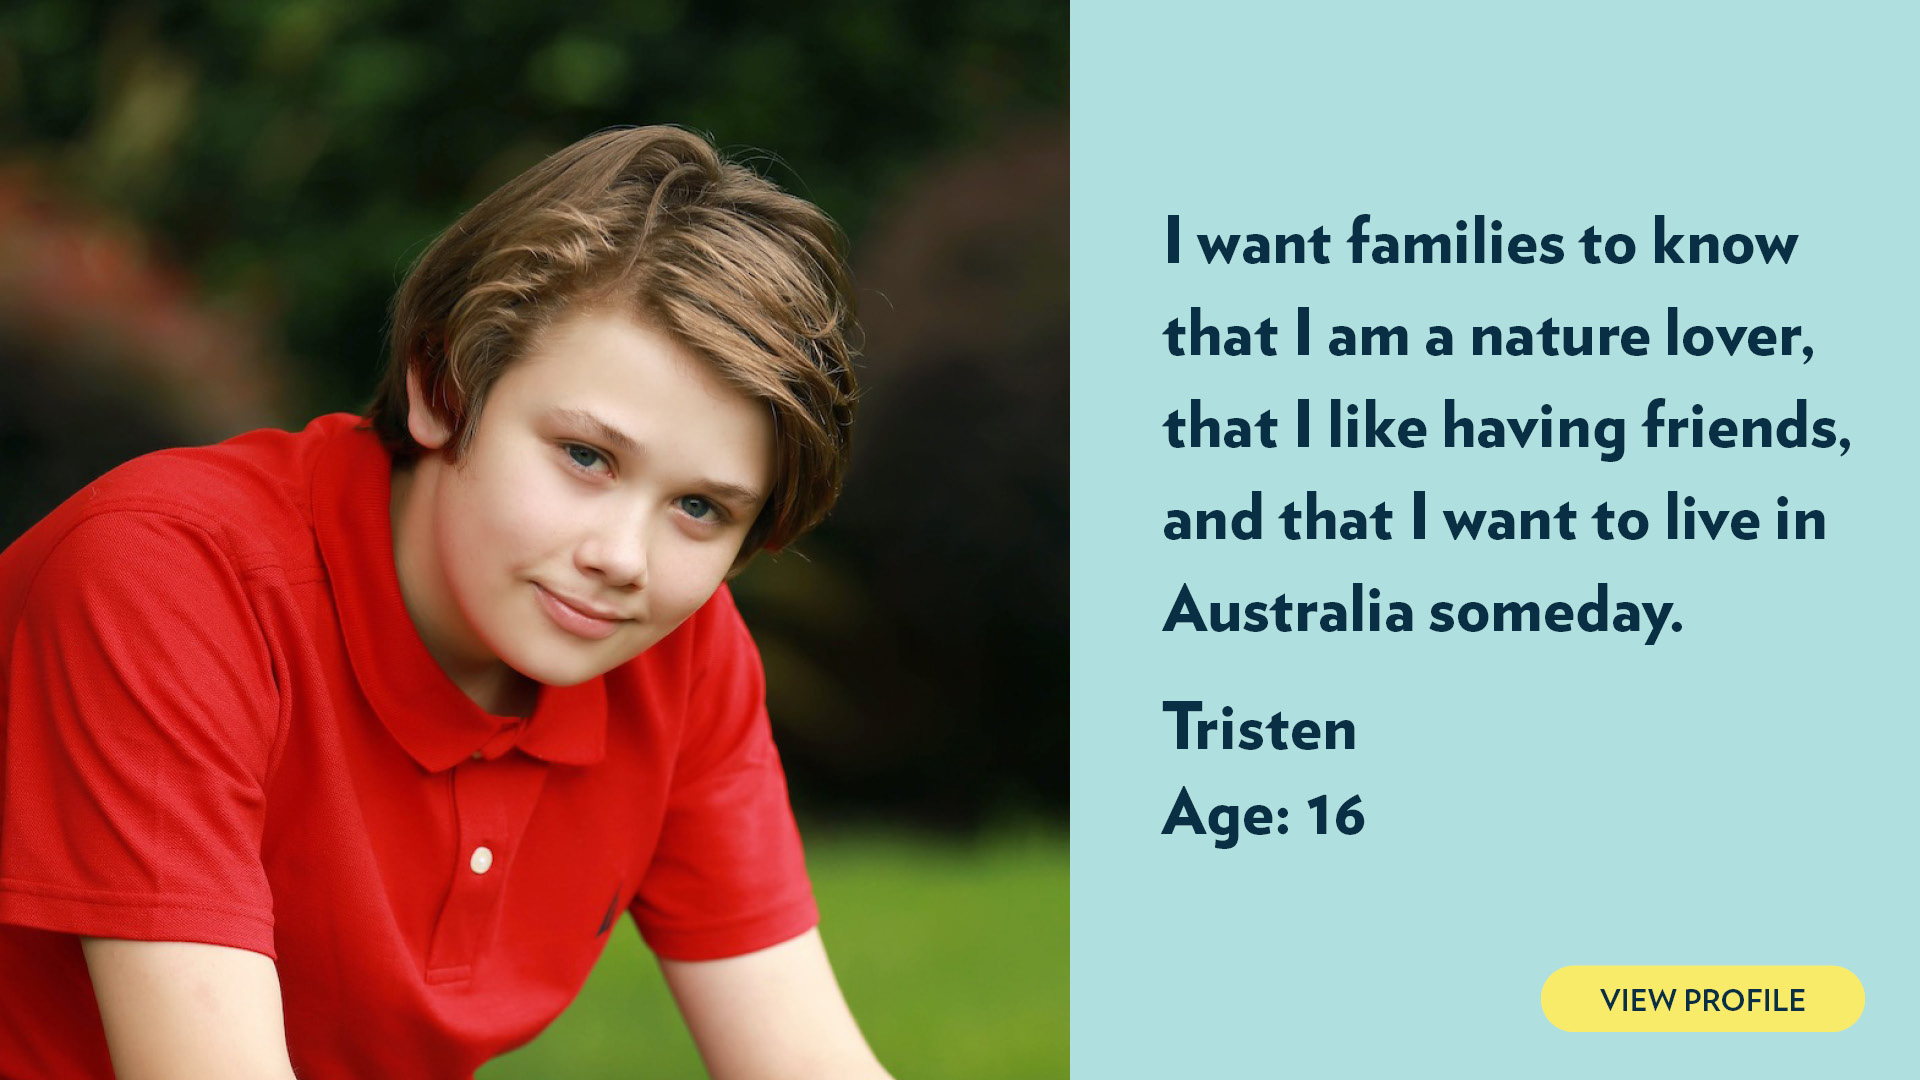 Tristen, age 16. I want families to know that I am a nature lover, that I like having friends, and that I want to live in Australia someday. View profile.